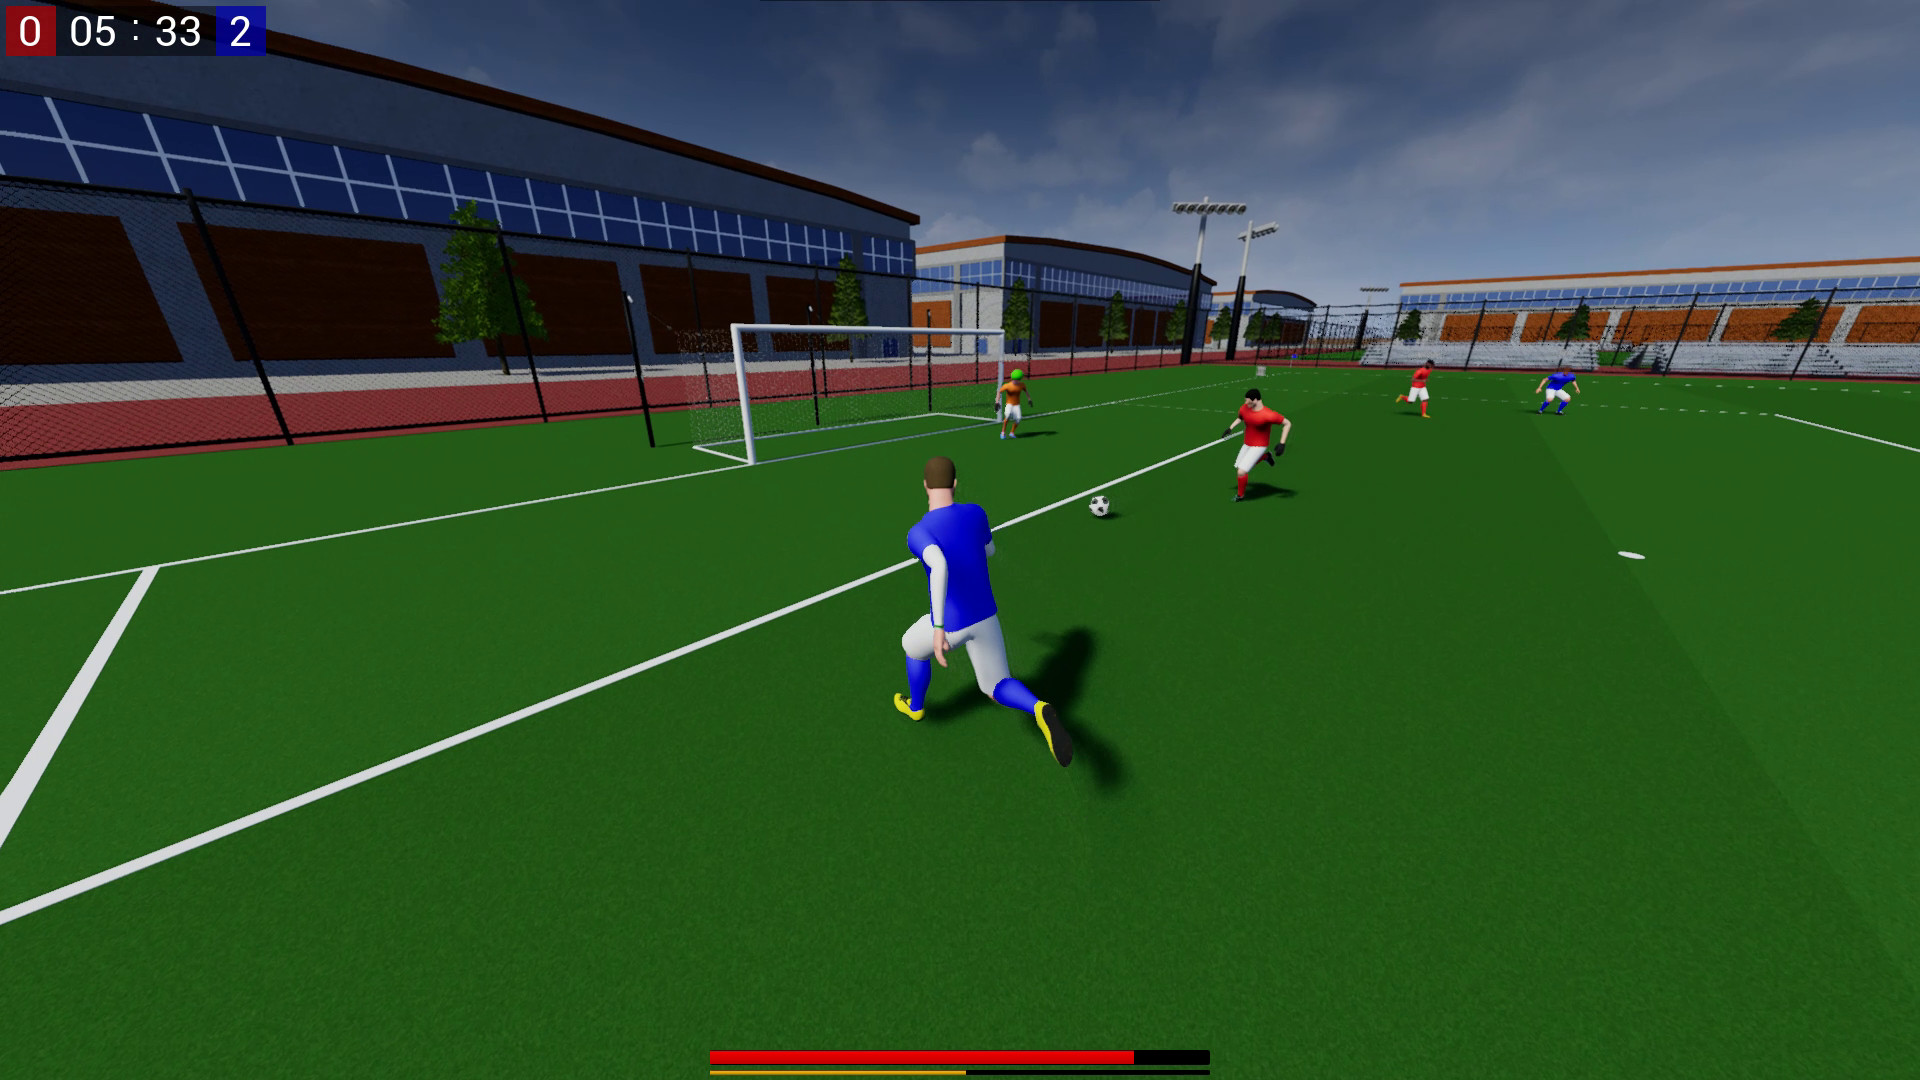 Pro Soccer Online On Steam escapeauthority